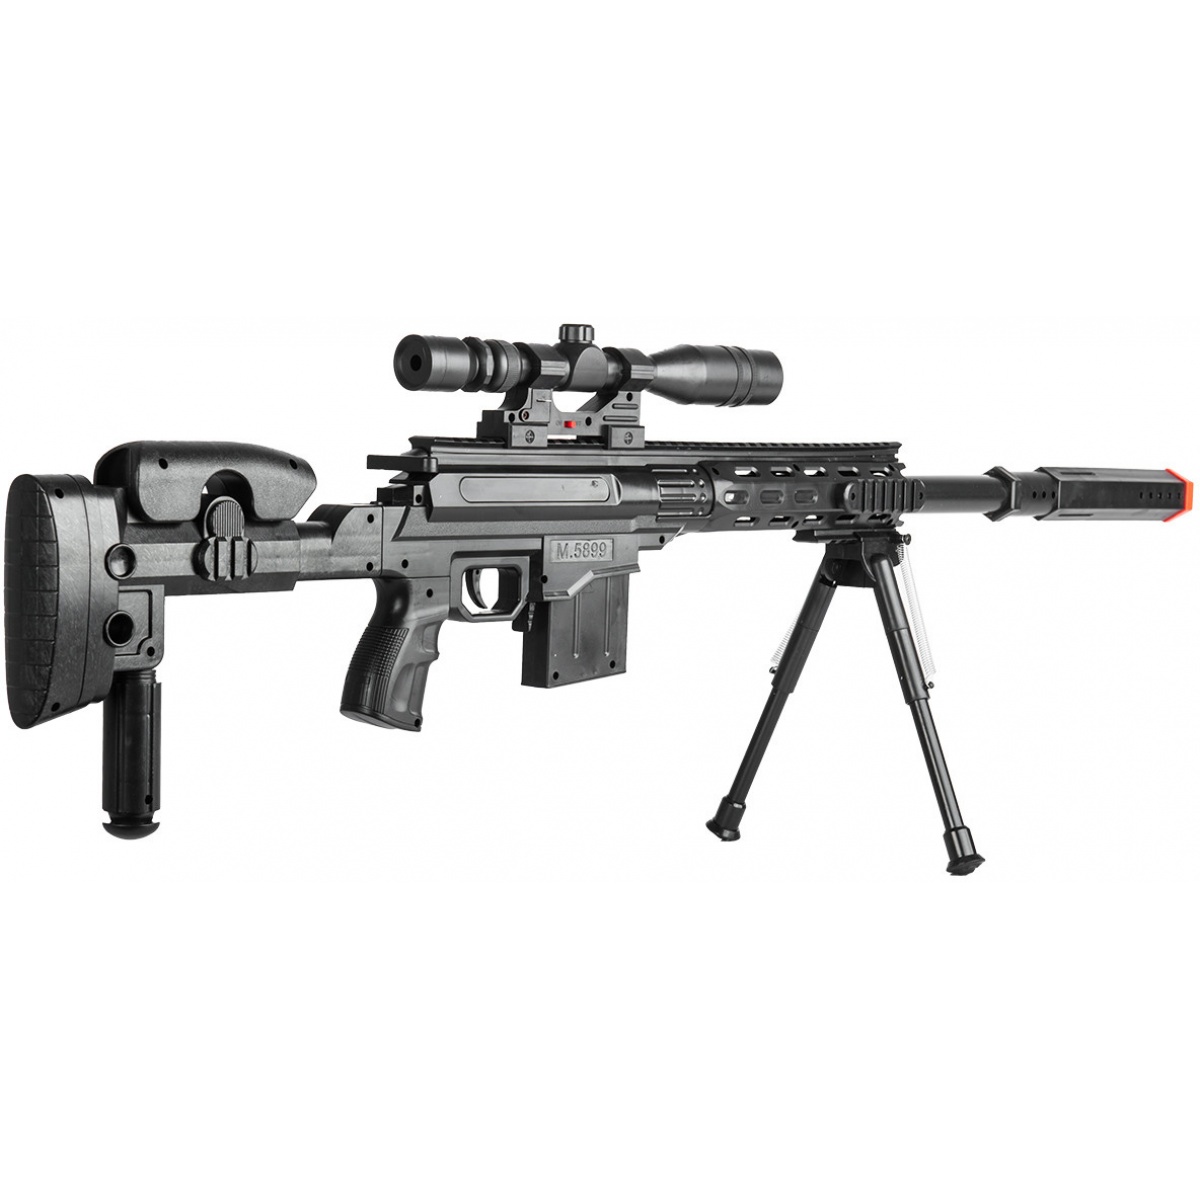 UK Arms P2668 Tactical Spring Powered Airsoft Sniper Rifle w/ Scope ...